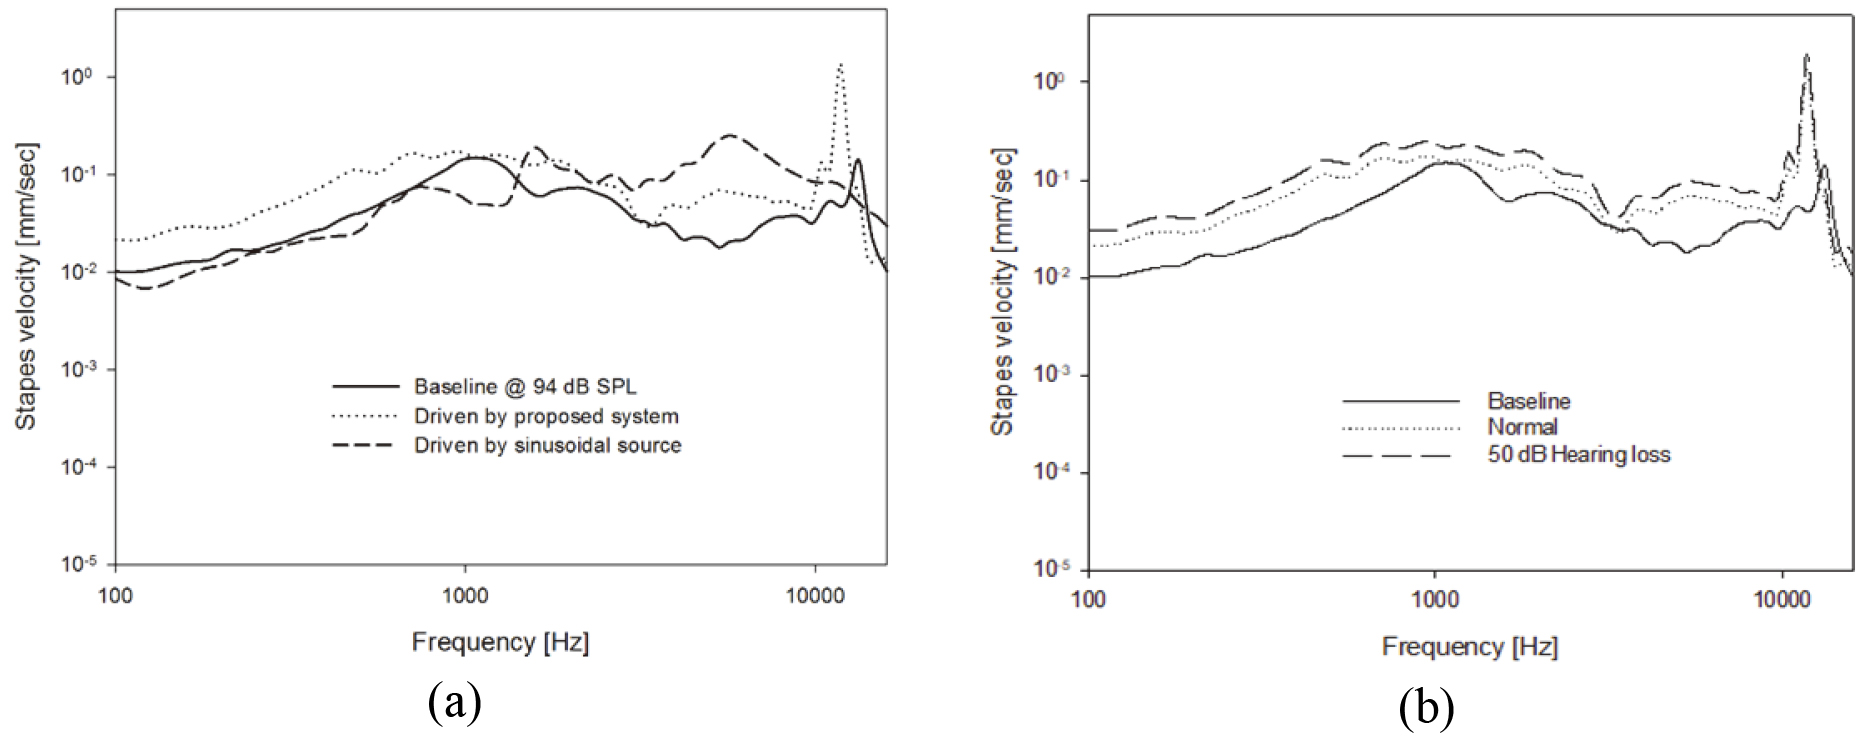 Results of human cadaver experiments; (a) basic output characteristic with no gain, (b) comparison of gain characteristic for normal hearing loss and 50 dB hearing loss by FIG6 fitting rule.